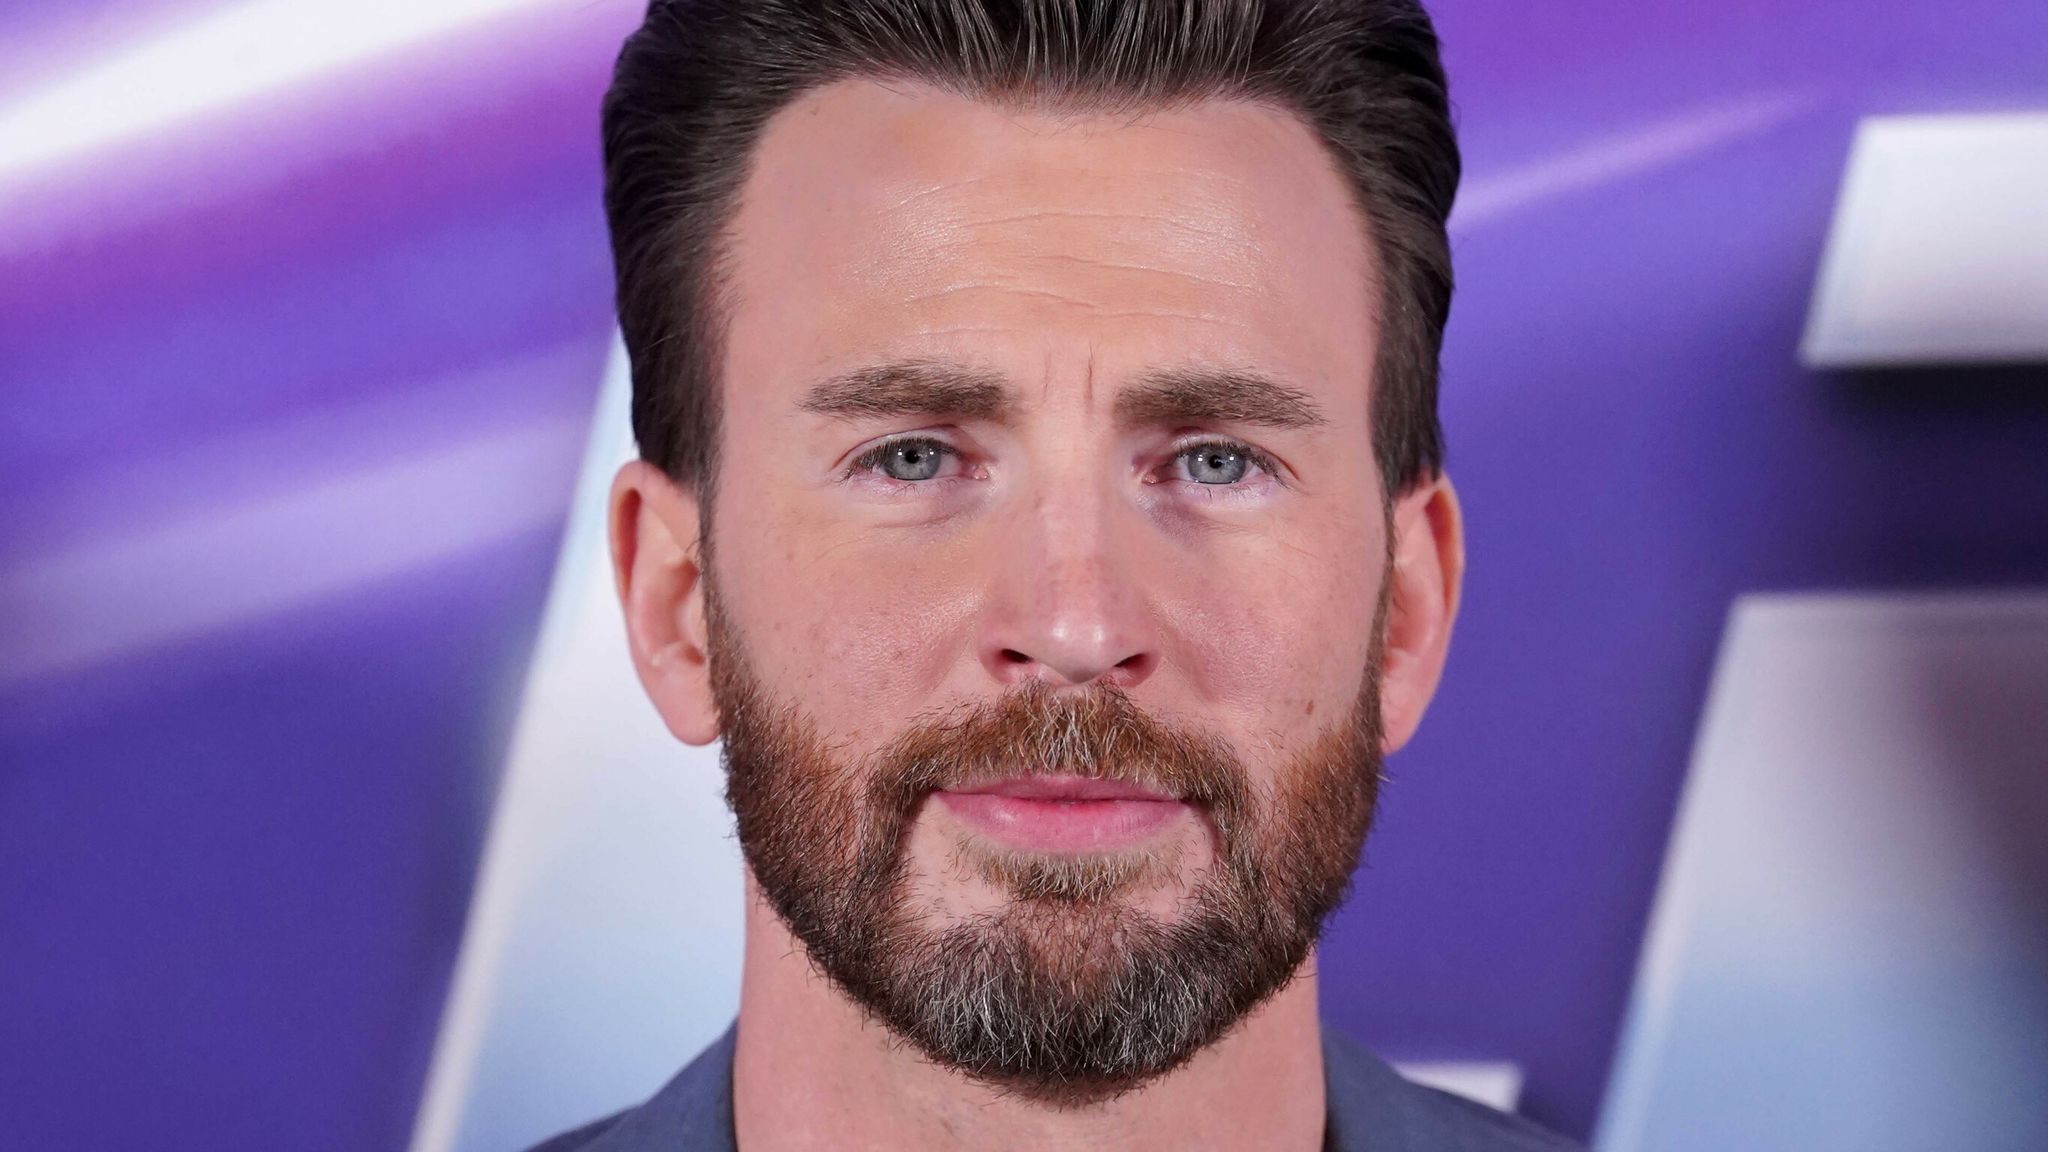 Captain America Star Chris Evans Named Sexiest Man Alive Ents And Arts News Sky News